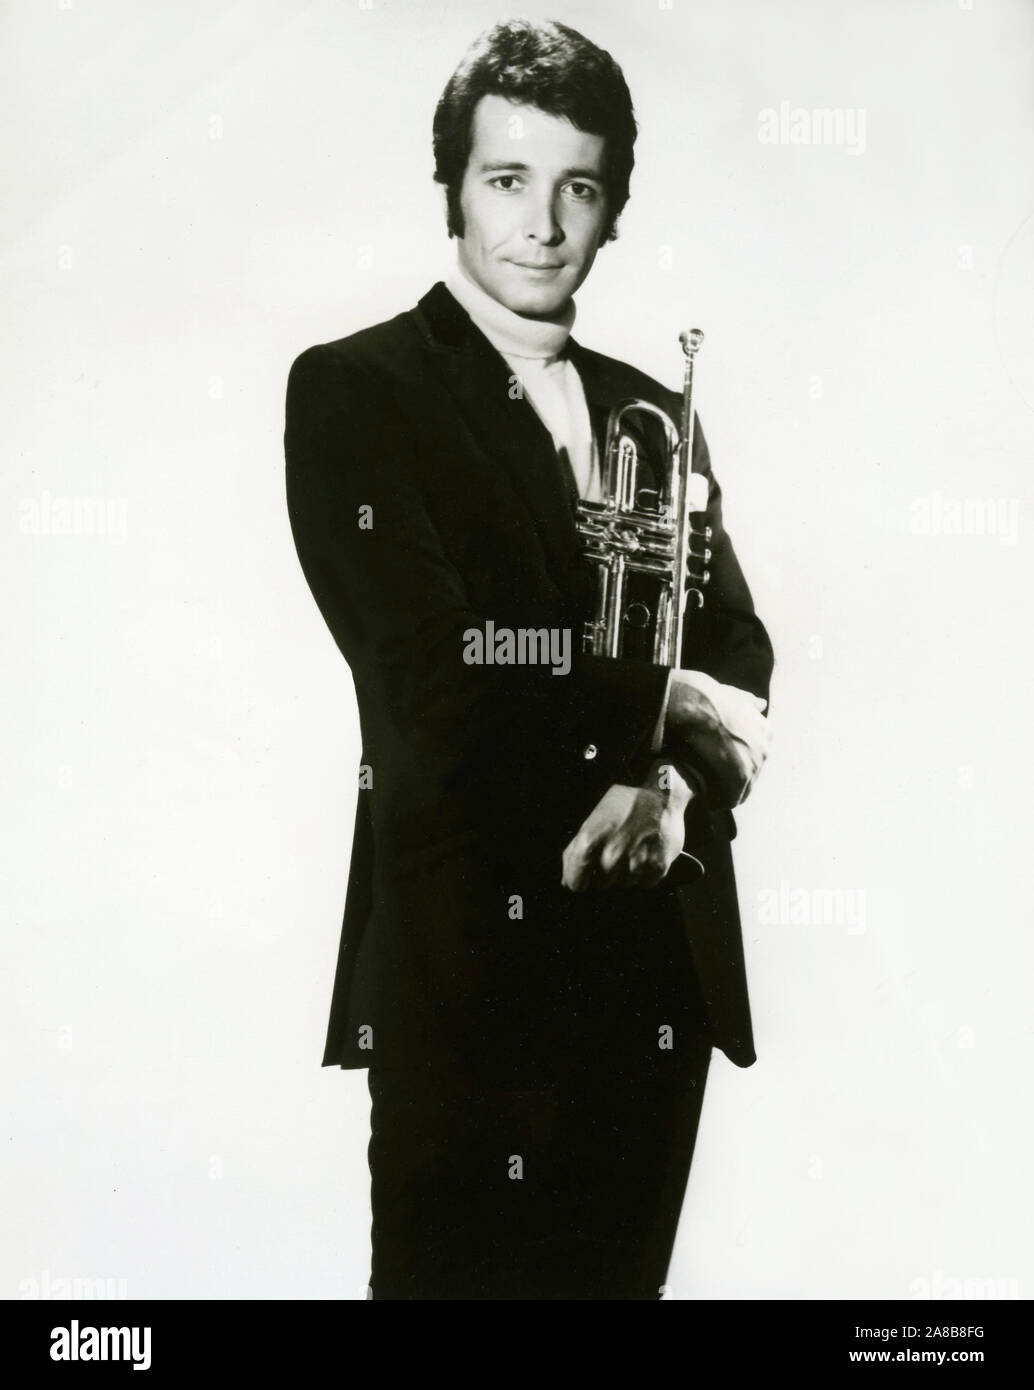 Publicity photo of musician Herb Alpert for A&M Records circa 1960s Stock Photo